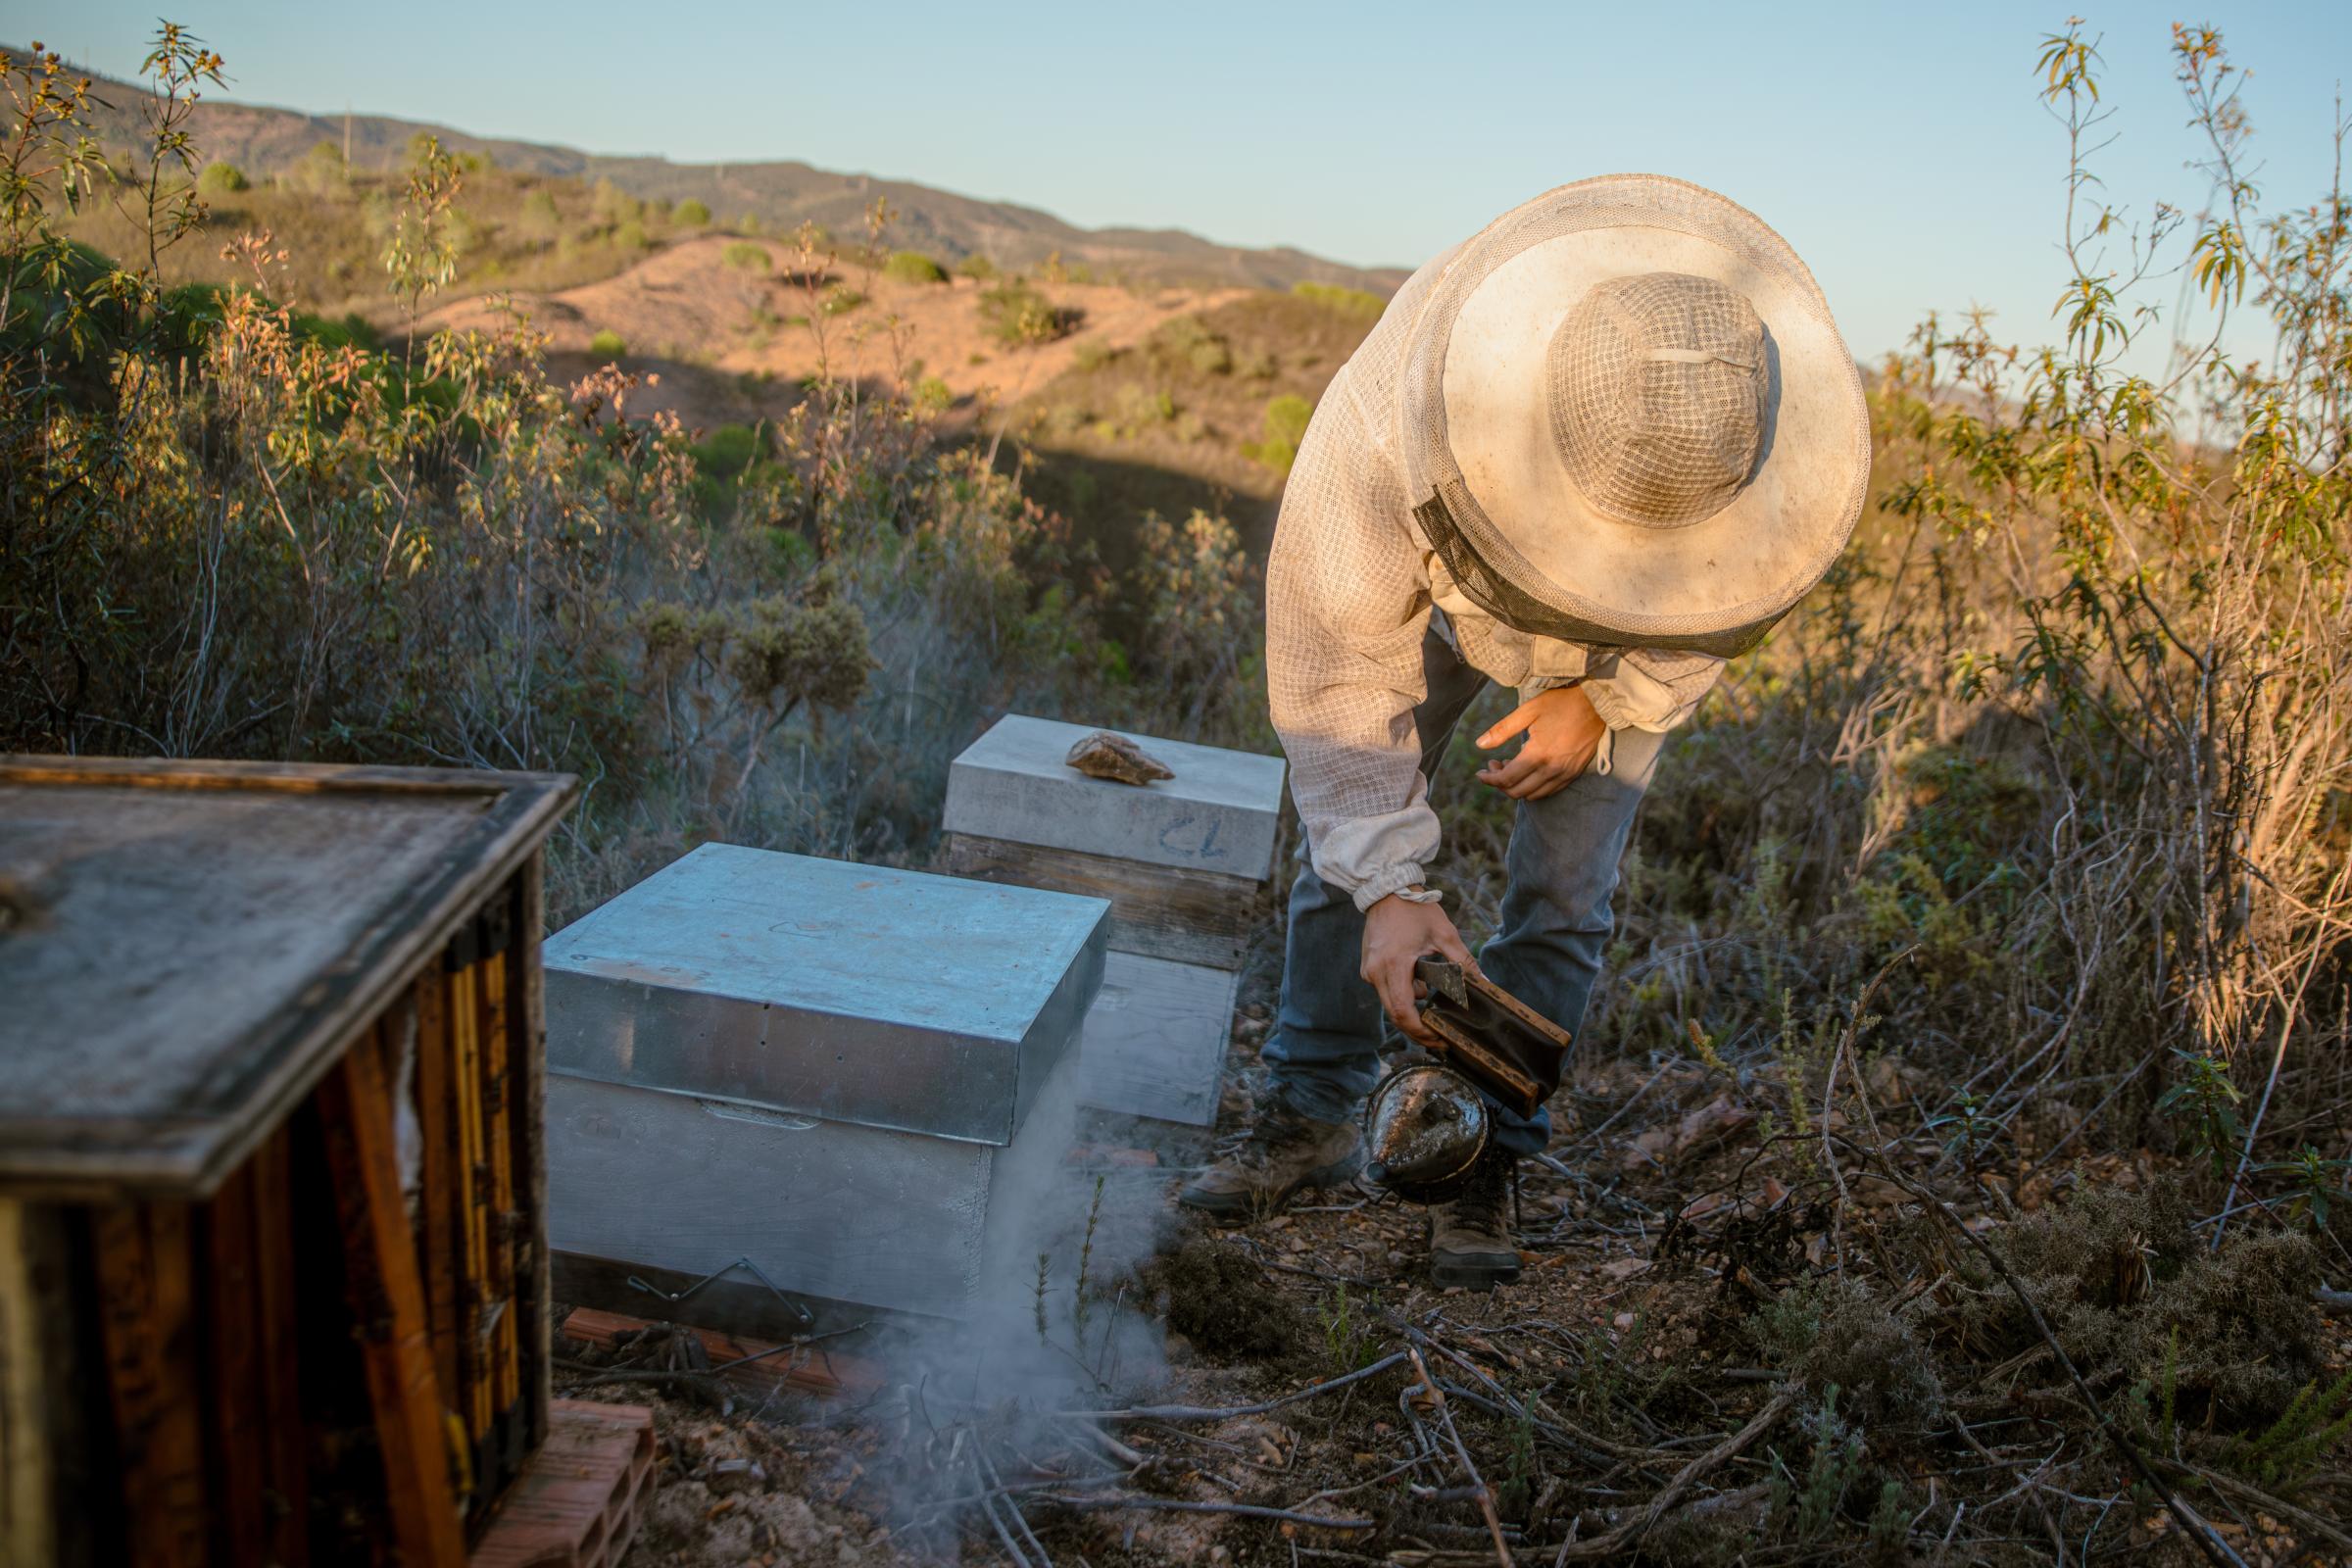 Portuguese Bee. - With the smoke, the bees are assuming they will need to...